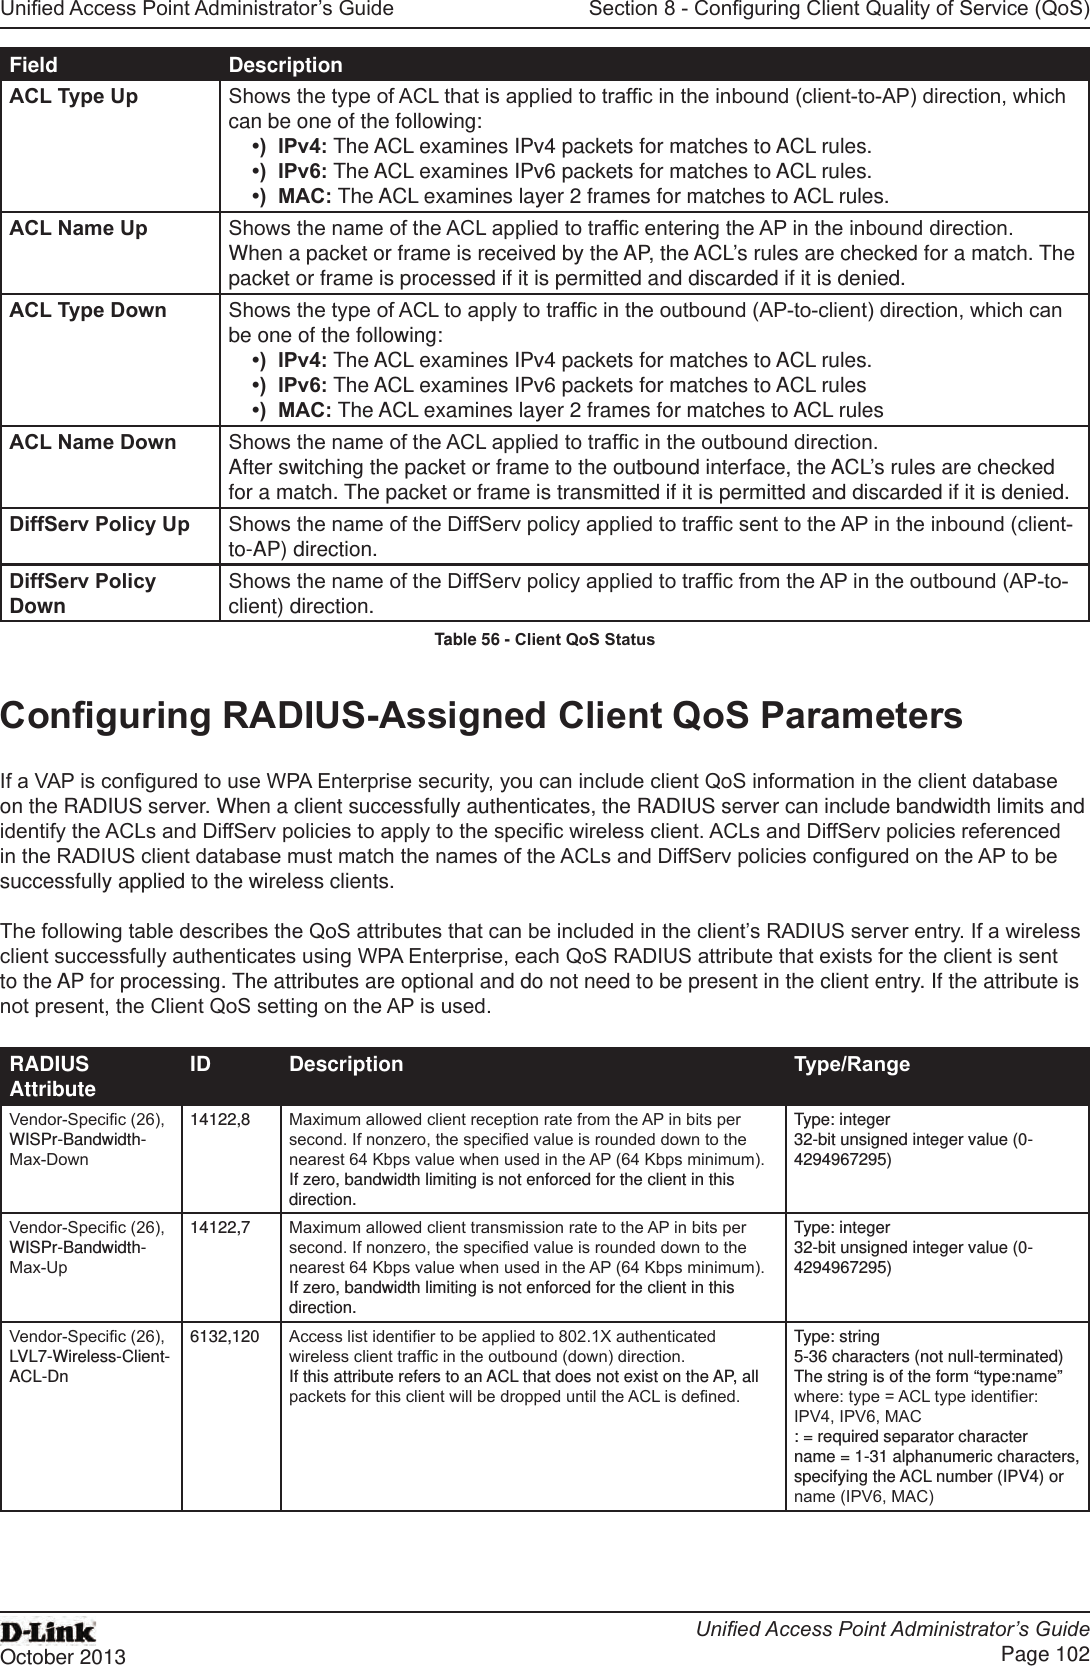 Unied Access Point Administrator’s GuideUnied Access Point Administrator’s GuidePage 102October 2013Section 8 - Conguring Client Quality of Service (QoS)Field DescriptionACL Type Up Shows the type of ACL that is applied to trafc in the inbound (client-to-AP) direction, which can be one of the following: •)  IPv4: The ACL examines IPv4 packets for matches to ACL rules.•)  IPv6: The ACL examines IPv6 packets for matches to ACL rules.•)  MAC: The ACL examines layer 2 frames for matches to ACL rules.ACL Name Up Shows the name of the ACL applied to trafc entering the AP in the inbound direction. When a packet or frame is received by the AP, the ACL’s rules are checked for a match. The packet or frame is processed if it is permitted and discarded if it is denied.ACL Type Down Shows the type of ACL to apply to trafc in the outbound (AP-to-client) direction, which can be one of the following: •)  IPv4: The ACL examines IPv4 packets for matches to ACL rules.•)  IPv6: The ACL examines IPv6 packets for matches to ACL rules•)  MAC: The ACL examines layer 2 frames for matches to ACL rulesACL Name Down Shows the name of the ACL applied to trafc in the outbound direction. After switching the packet or frame to the outbound interface, the ACL’s rules are checked for a match. The packet or frame is transmitted if it is permitted and discarded if it is denied.DiffServ Policy Up Shows the name of the DiffServ policy applied to trafc sent to the AP in the inbound (client-to-AP) direction.DiffServ Policy Down Shows the name of the DiffServ policy applied to trafc from the AP in the outbound (AP-to-client) direction.Table 56 - Client QoS StatusConguring RADIUS-Assigned Client QoS ParametersIf a VAP is congured to use WPA Enterprise security, you can include client QoS information in the client database on the RADIUS server. When a client successfully authenticates, the RADIUS server can include bandwidth limits and identify the ACLs and DiffServ policies to apply to the specic wireless client. ACLs and DiffServ policies referenced in the RADIUS client database must match the names of the ACLs and DiffServ policies congured on the AP to be successfully applied to the wireless clients.The following table describes the QoS attributes that can be included in the client’s RADIUS server entry. If a wireless client successfully authenticates using WPA Enterprise, each QoS RADIUS attribute that exists for the client is sent to the AP for processing. The attributes are optional and do not need to be present in the client entry. If the attribute is not present, the Client QoS setting on the AP is used.RADIUS Attribute ID Description Type/RangeVendor-Specic (26), WISPr-Bandwidth-Max-Down14122,8 Maximum allowed client reception rate from the AP in bits per second. If nonzero, the specied value is rounded down to the nearest 64 Kbps value when used in the AP (64 Kbps minimum). If zero, bandwidth limiting is not enforced for the client in this direction.Type: integer32-bit unsigned integer value (0-4294967295)Vendor-Specic (26), WISPr-Bandwidth-Max-Up14122,7 Maximum allowed client transmission rate to the AP in bits per second. If nonzero, the specied value is rounded down to the nearest 64 Kbps value when used in the AP (64 Kbps minimum). If zero, bandwidth limiting is not enforced for the client in this direction.Type: integer32-bit unsigned integer value (0-4294967295)Vendor-Specic (26), LVL7-Wireless-Client-ACL-Dn6132,120 Access list identier to be applied to 802.1X authenticated wireless client trafc in the outbound (down) direction.If this attribute refers to an ACL that does not exist on the AP, all packets for this client will be dropped until the ACL is dened.Type: string5-36 characters (not null-terminated)The string is of the form “type:name” where: type = ACL type identier: IPV4, IPV6, MAC: = required separator charactername = 1-31 alphanumeric characters, specifying the ACL number (IPV4) or name (IPV6, MAC)